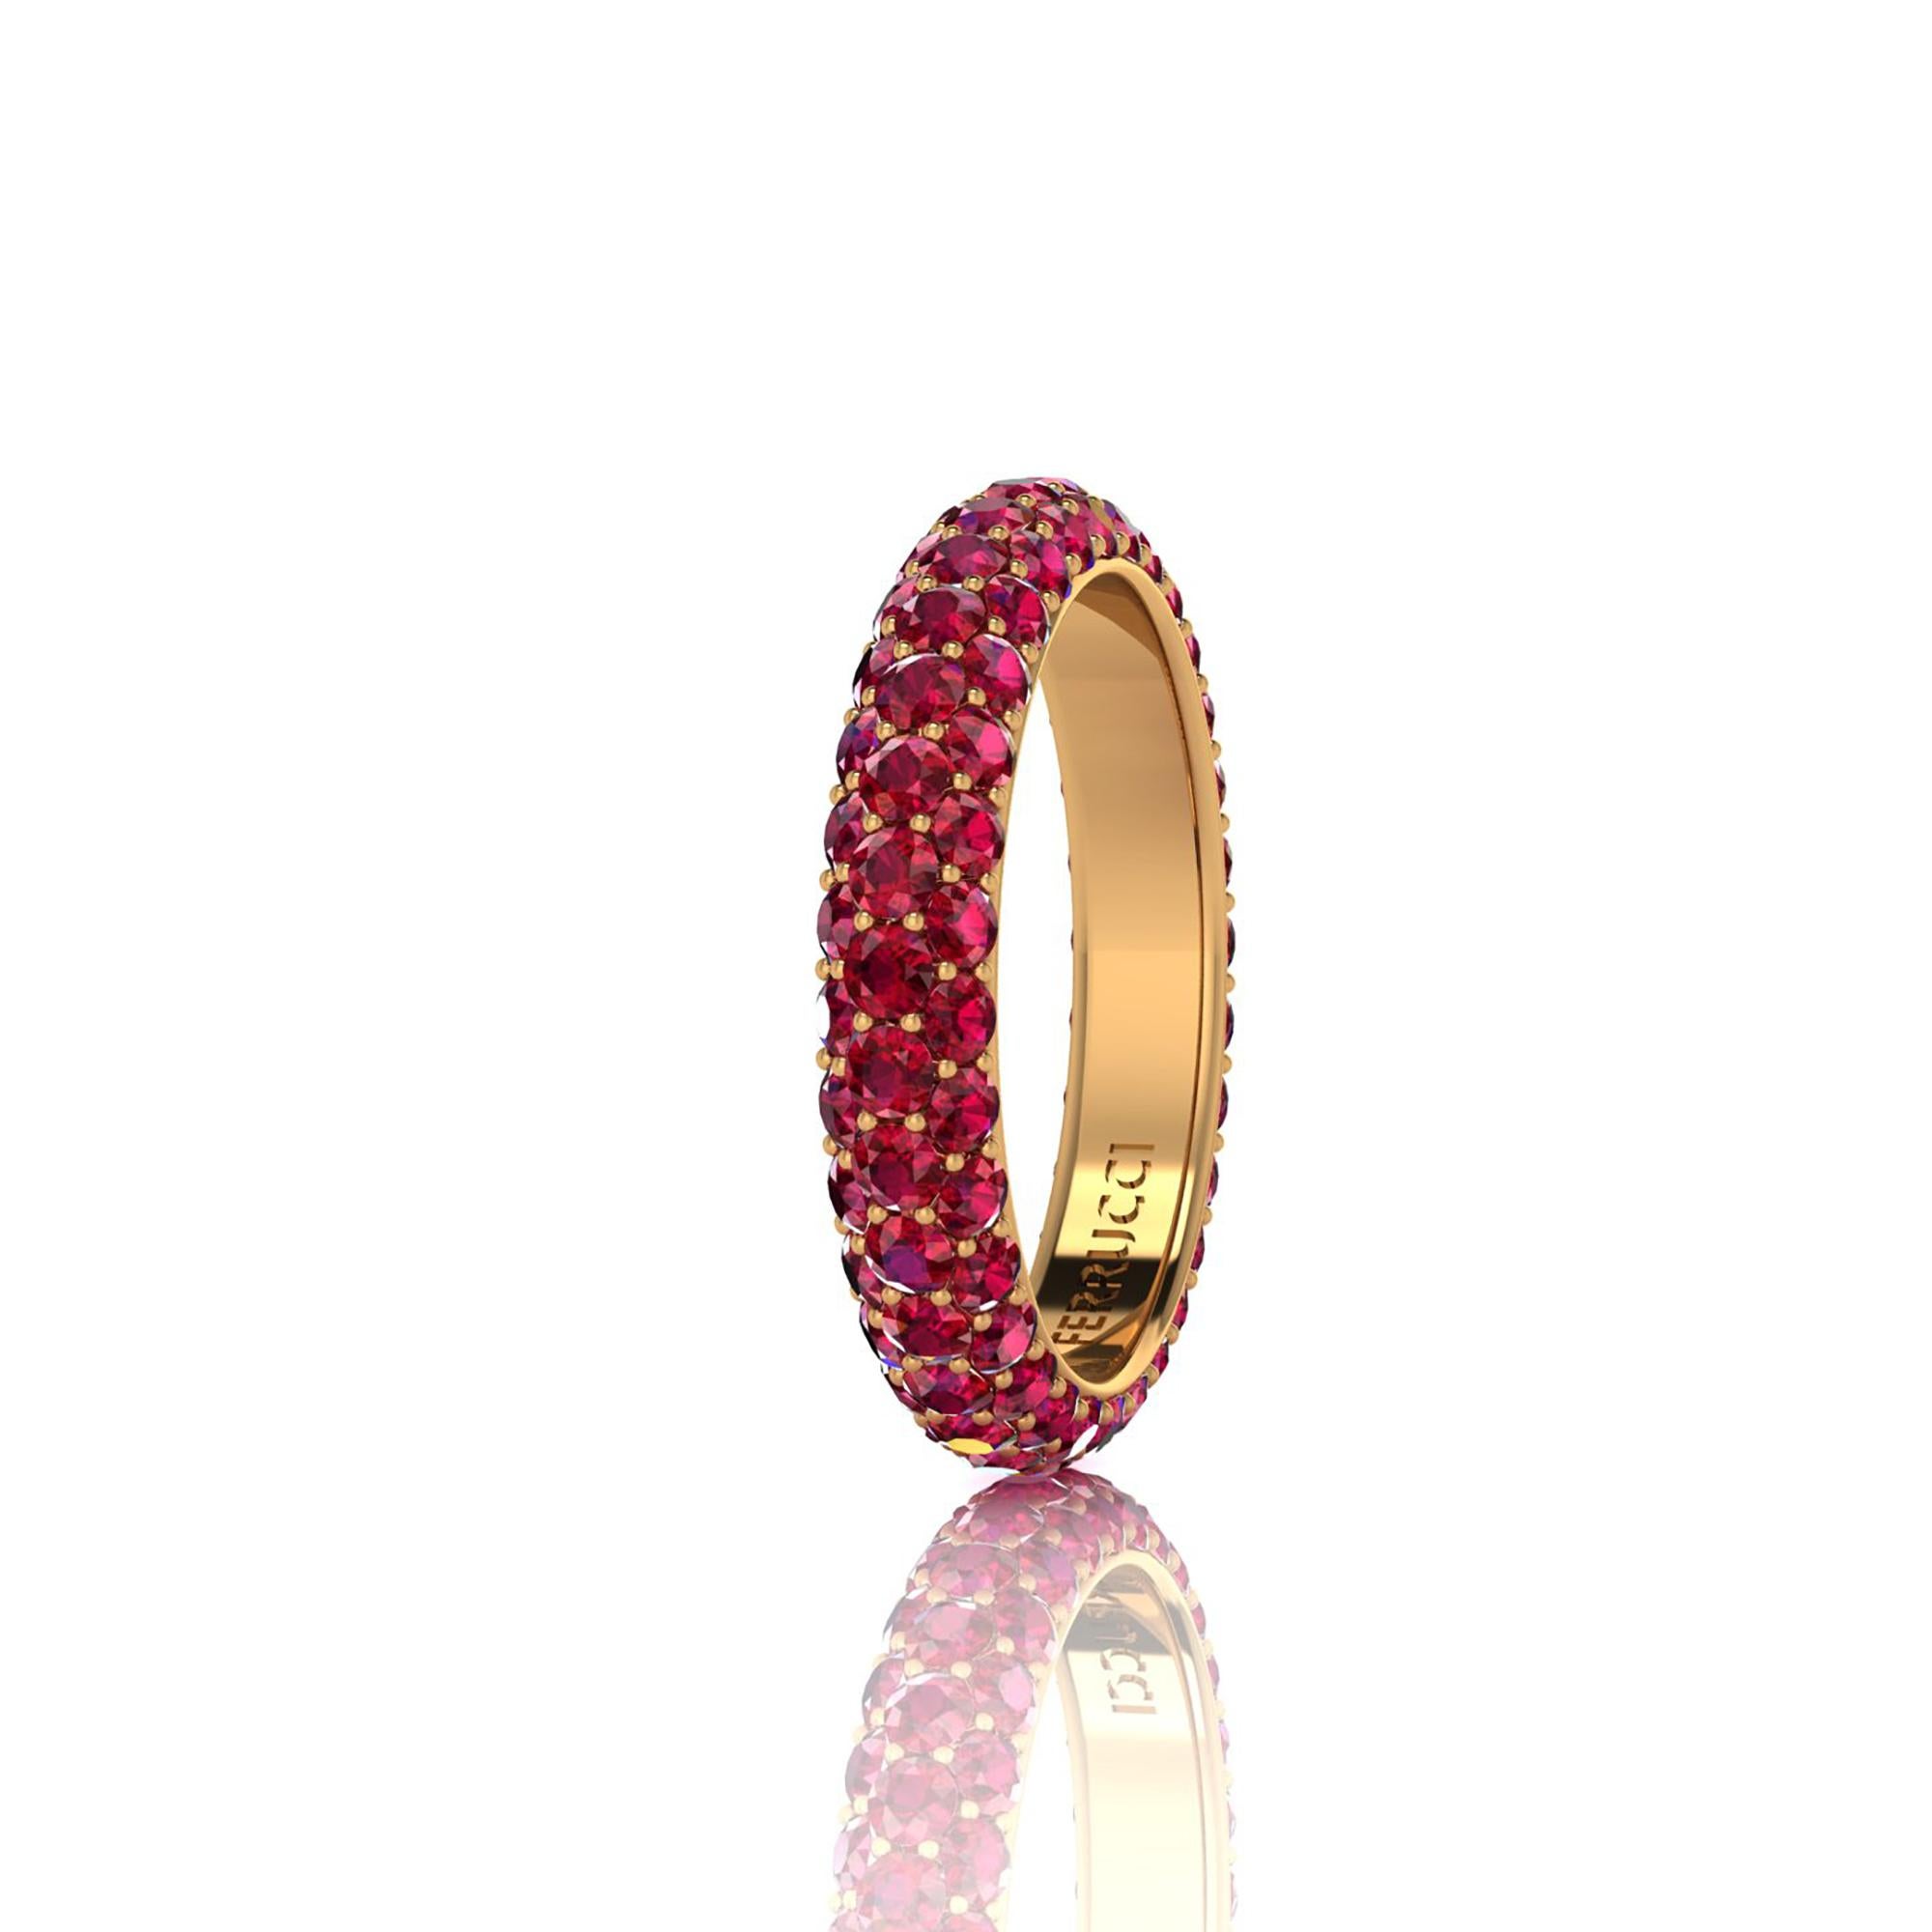 FERRUCCI Ruby eternity ring,  an approximate total carat weight of 2.00 carat, hand made in New York City with the best Italian craftsmanship, conceived in 18k yellow gold.
Classic, sophisticated, gorgeous look, everlasting in time.
This is a Ring